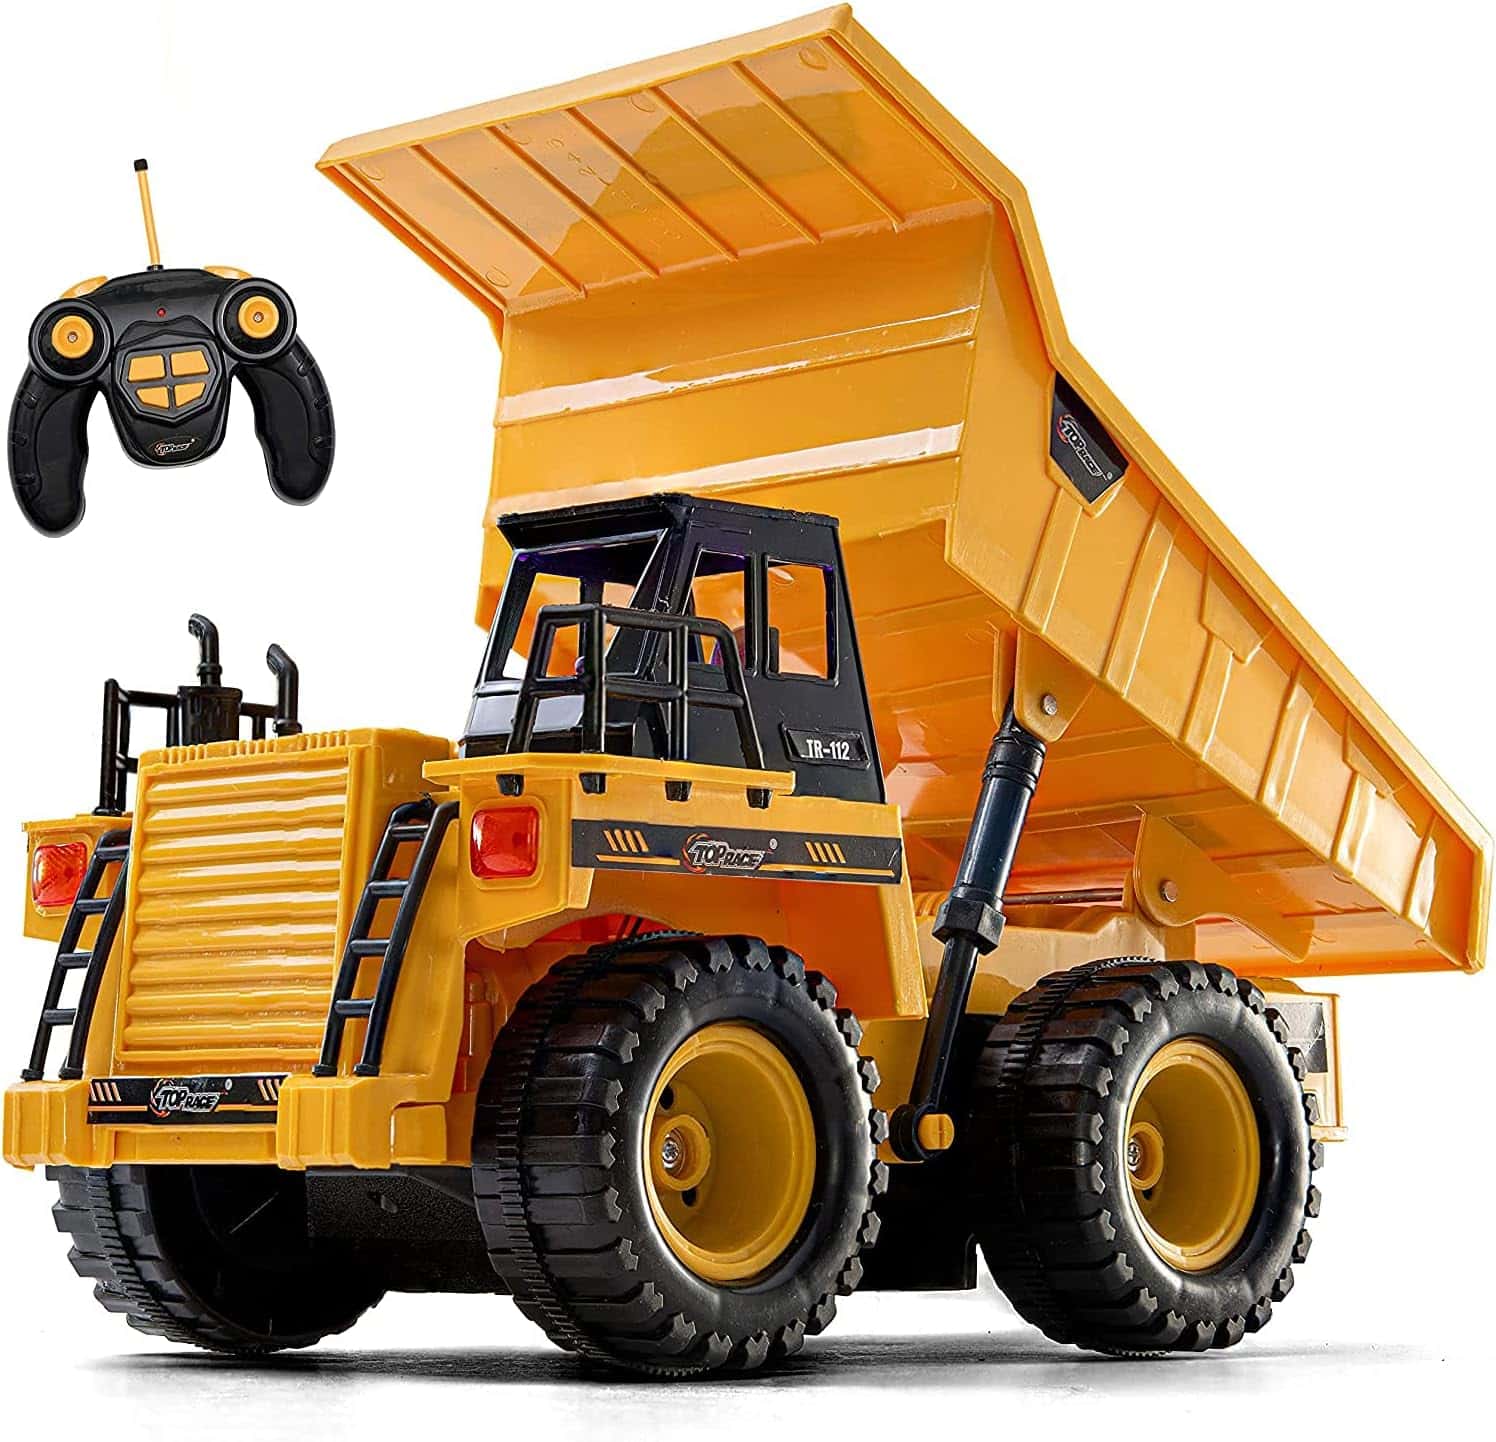 Top Race Remote Control Dump Truck Review: The Ultimate Toy for Kids